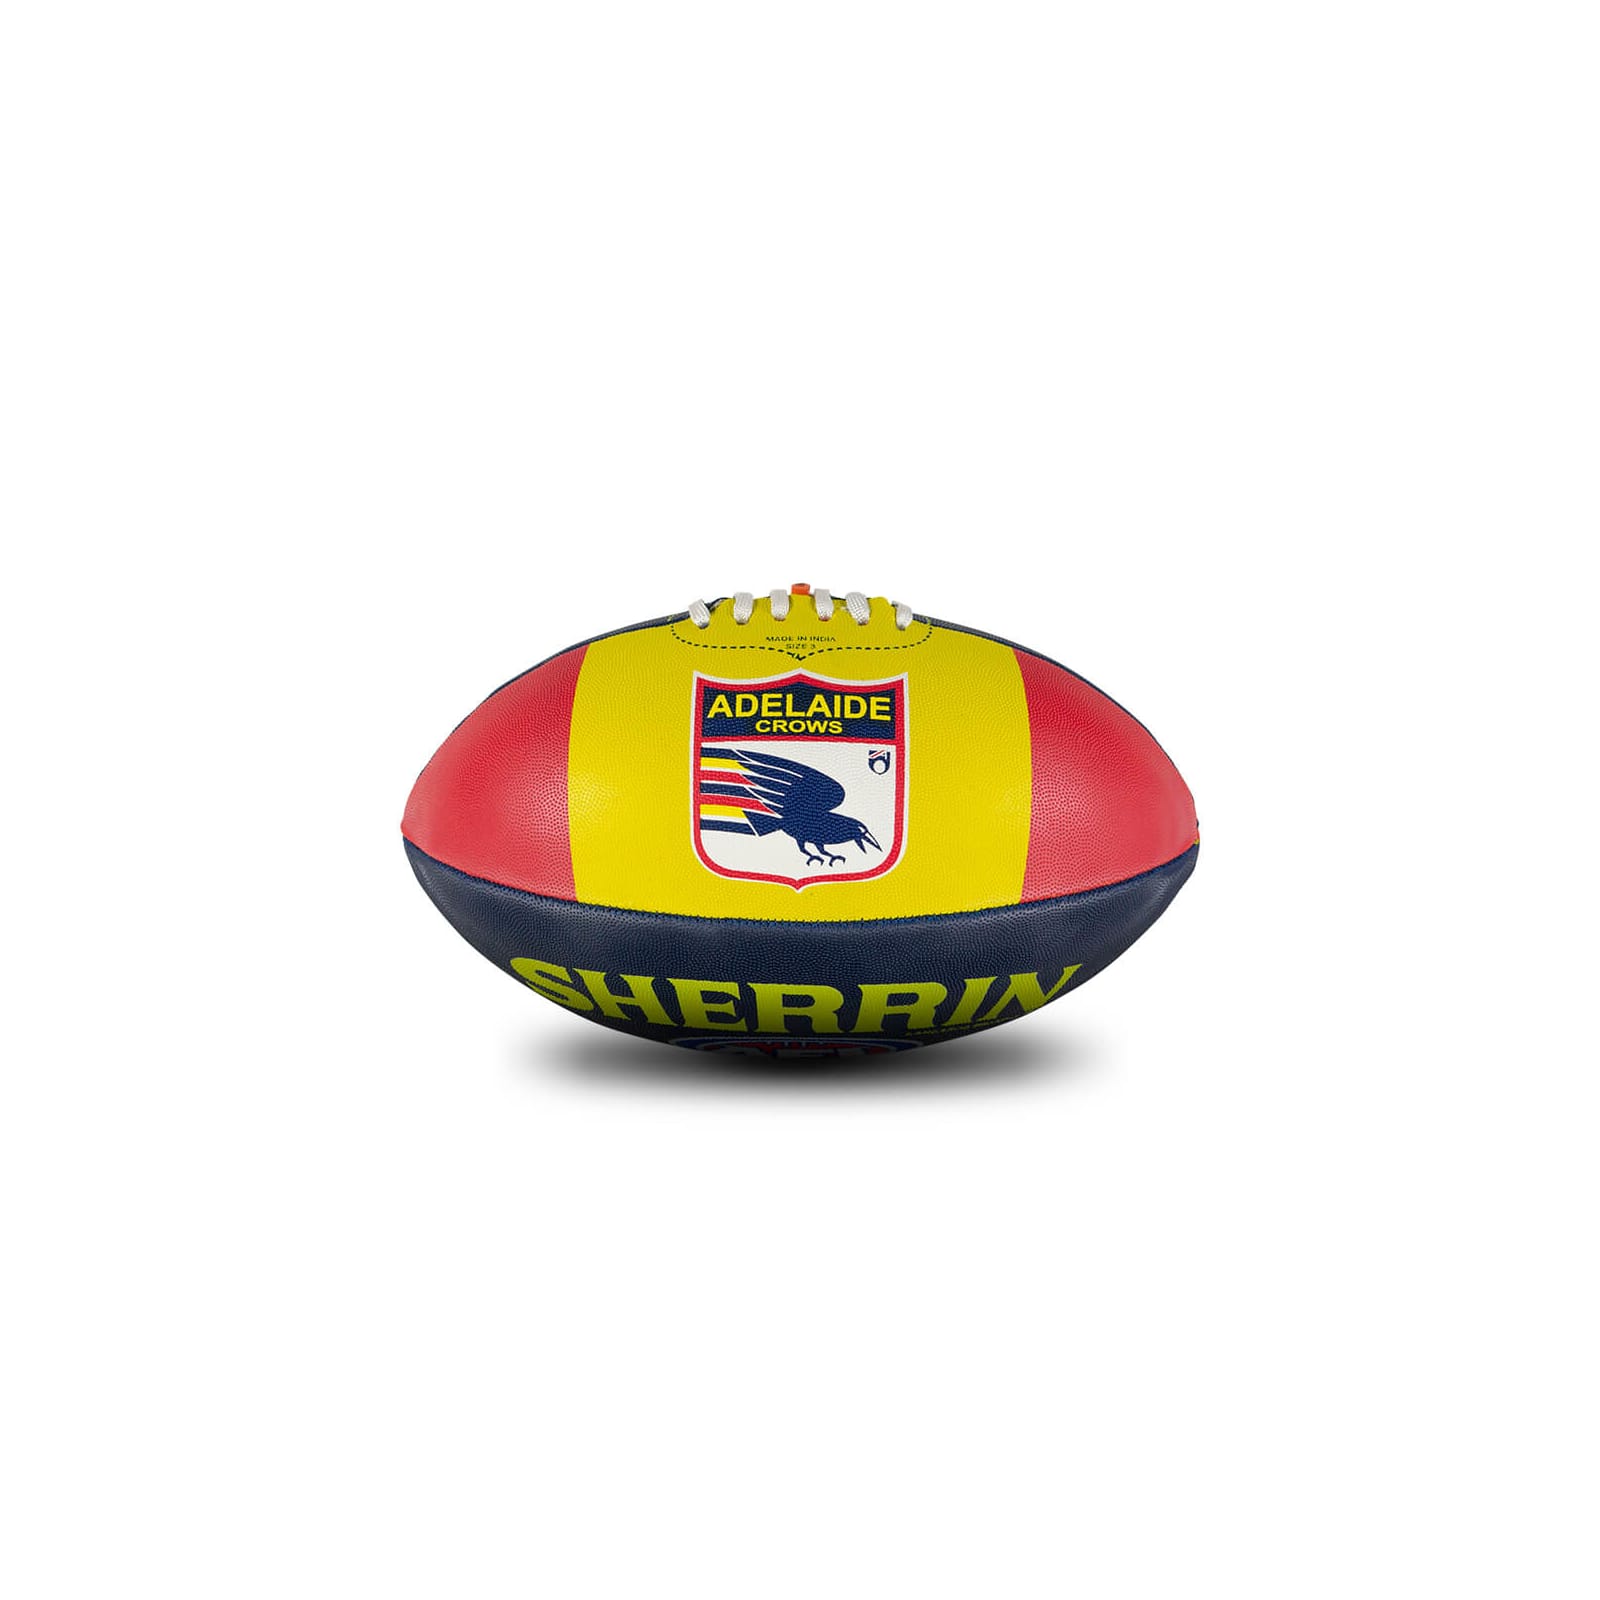 1st 18 Ball - Adelaide Crows